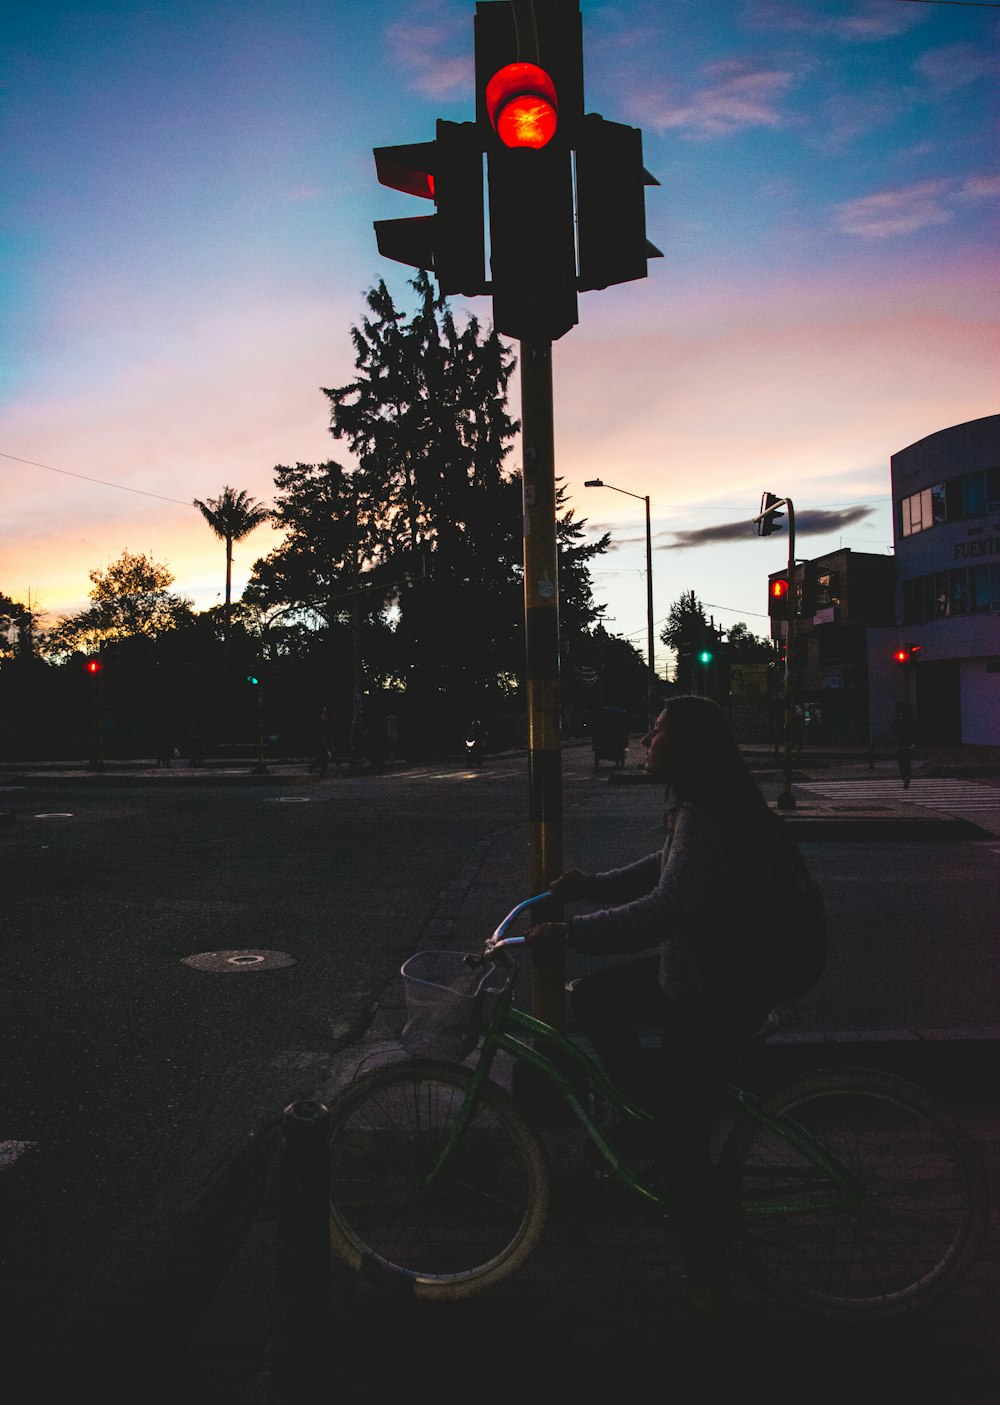 person riding bicycle on road during sunset